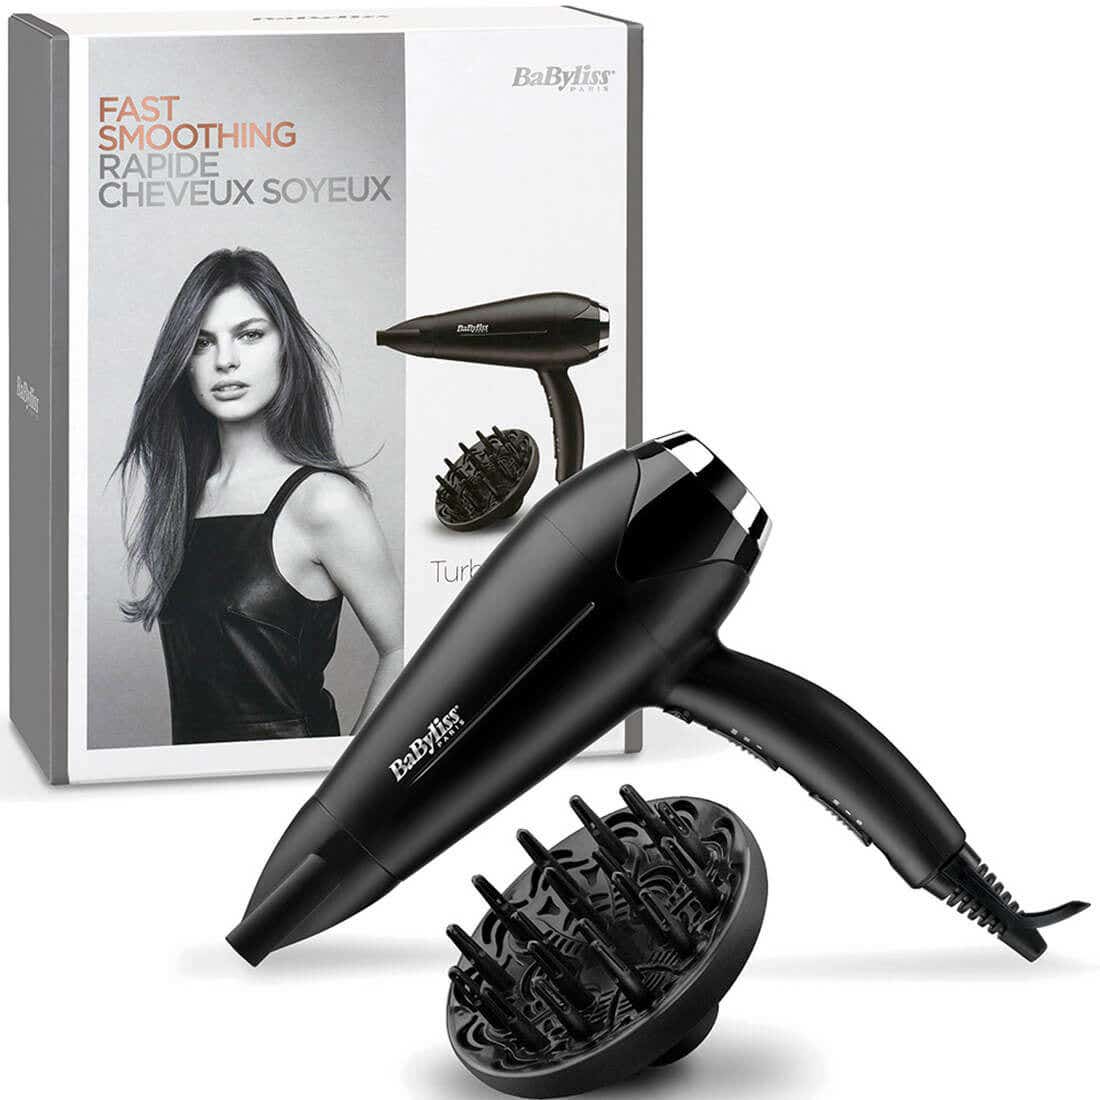 Babyliss Hair Dryer Italian With Curl Diffuser 2200w